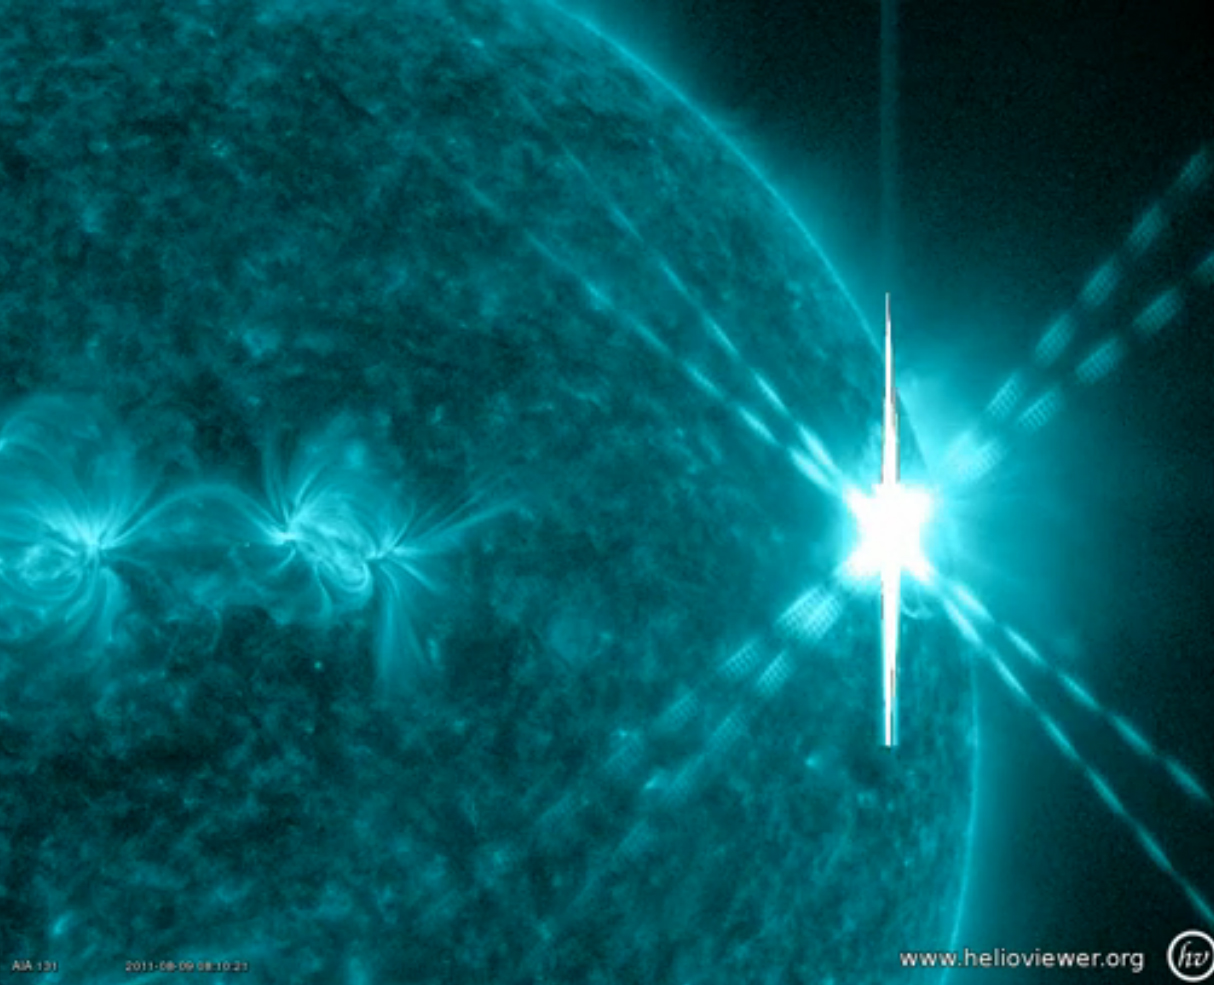 The coolest Images of the sun you've ever seen.